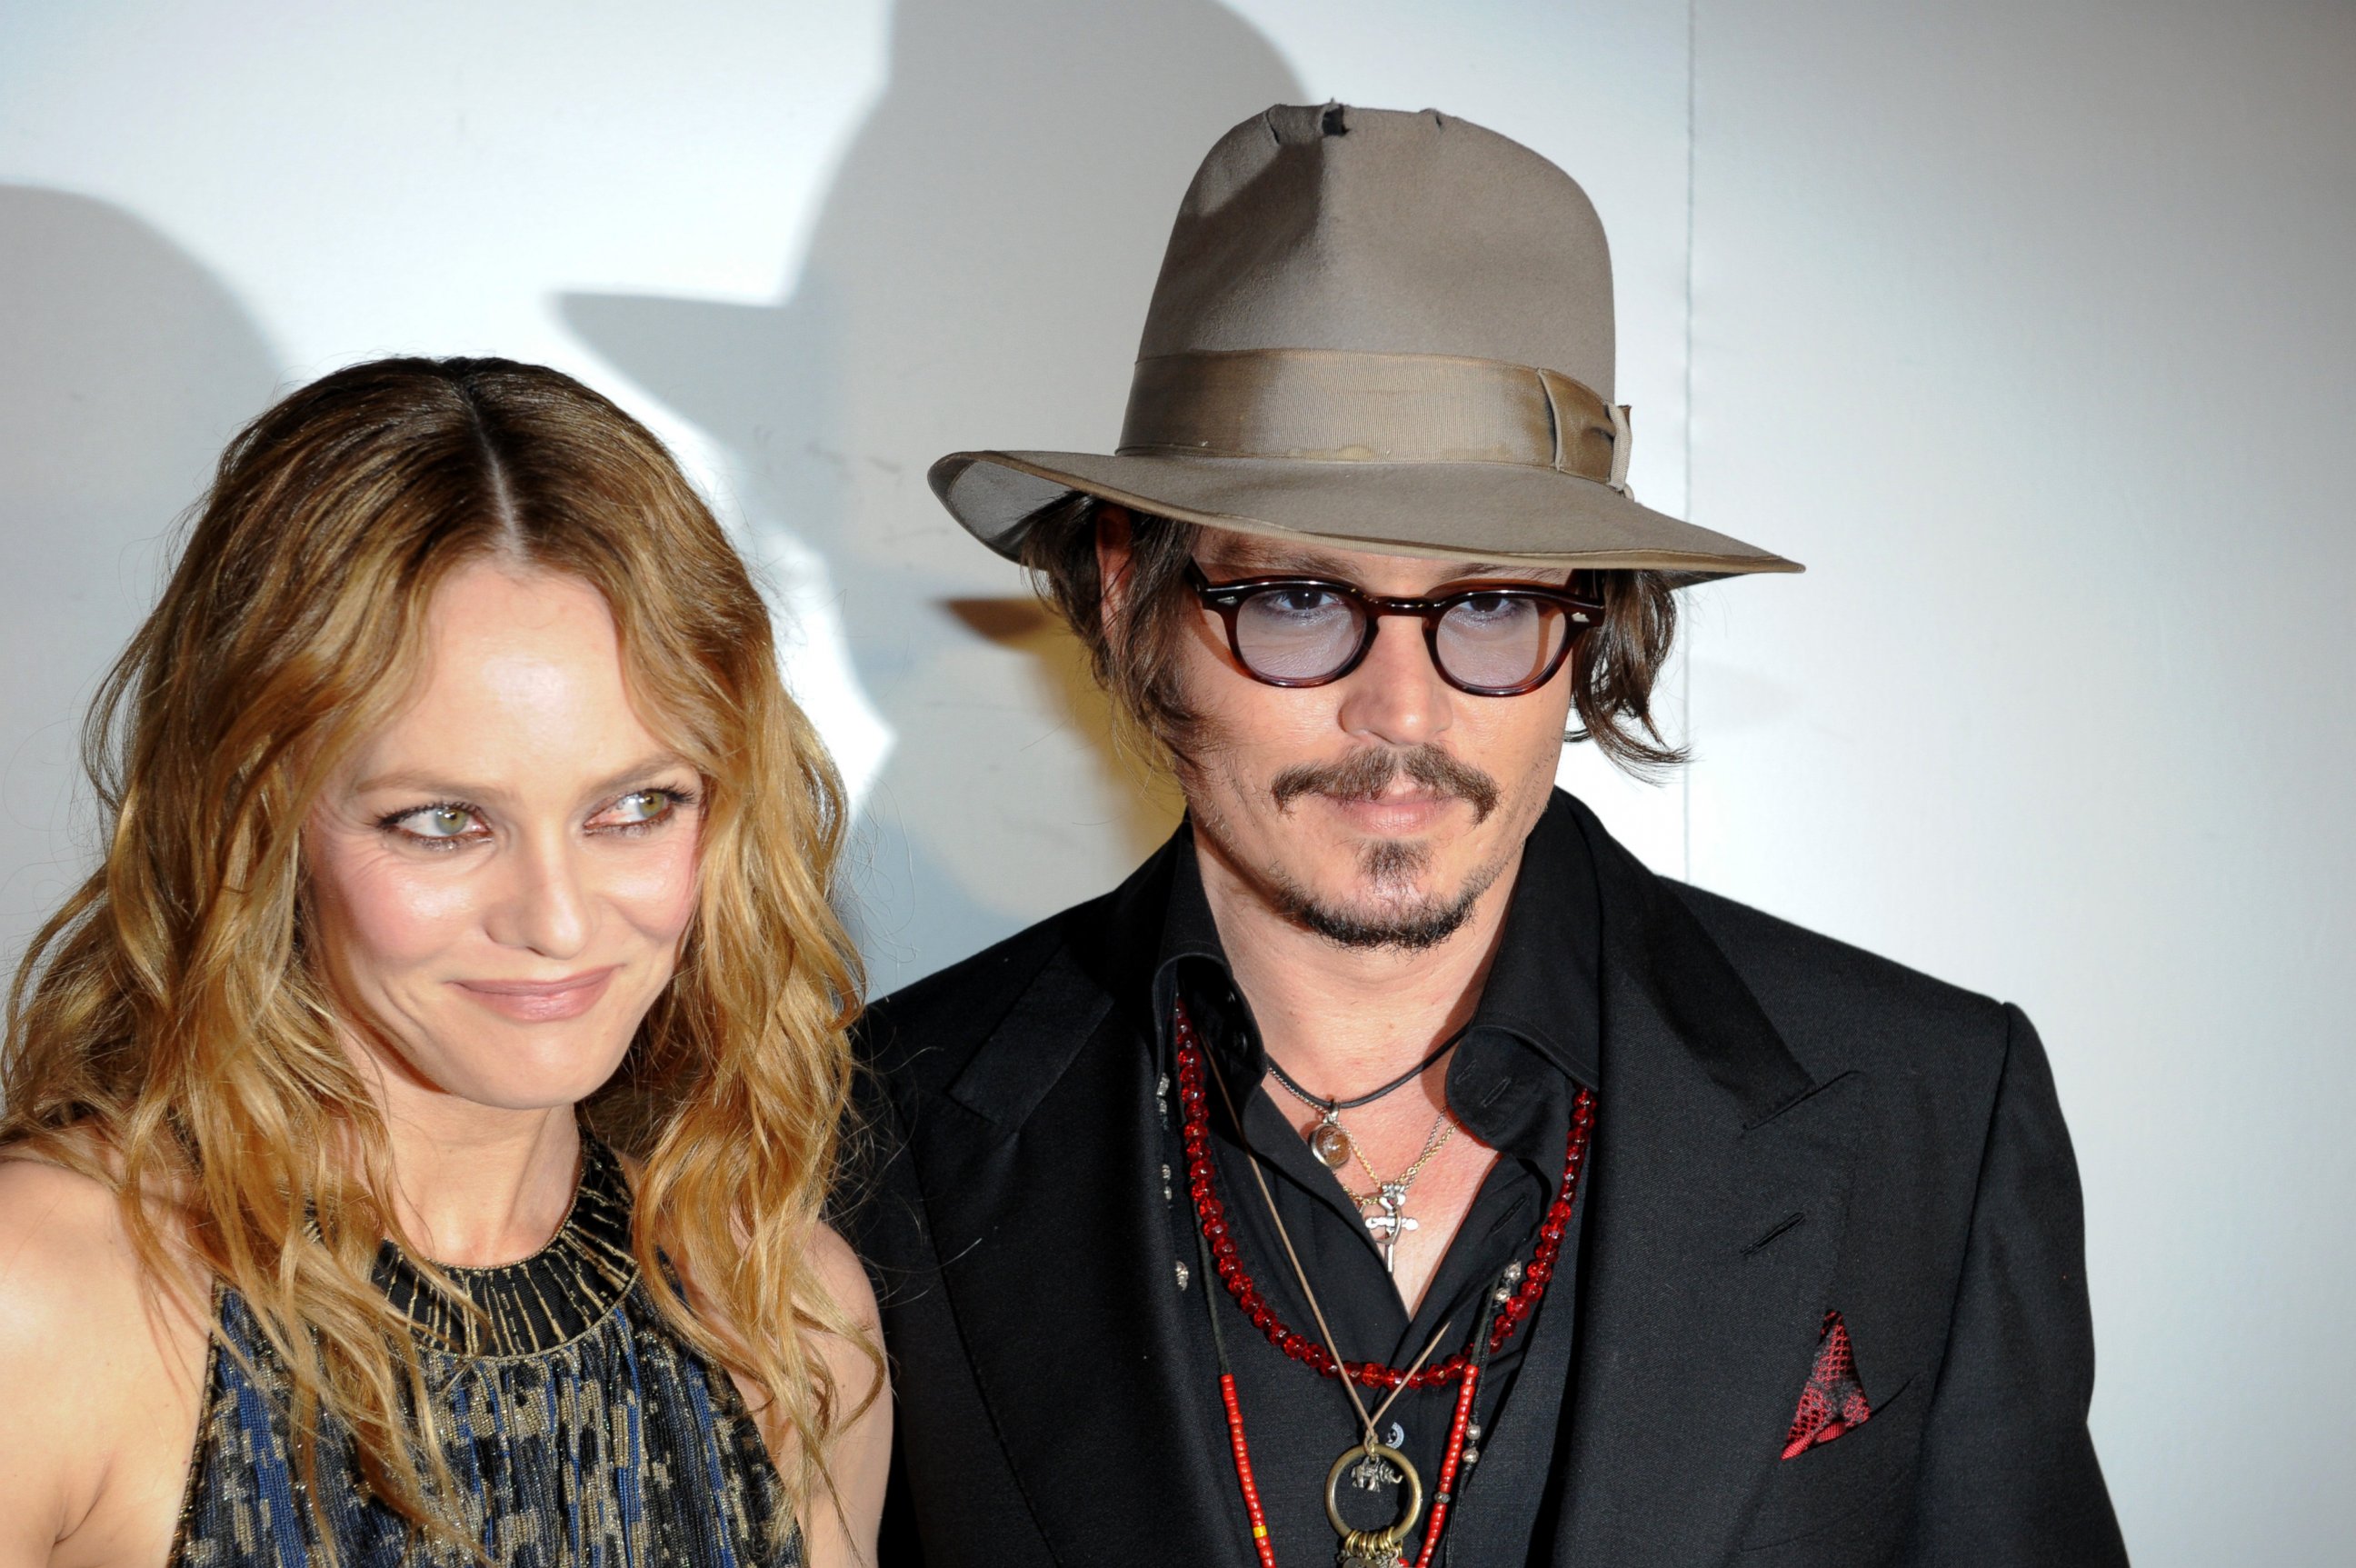 PHOTO: Vanessa Paradis and Johnny Depp arrive at the Figaro Madame/Chanel dinner during the 63rd Cannes Film Festival, May 18, 2010, in Cannes.